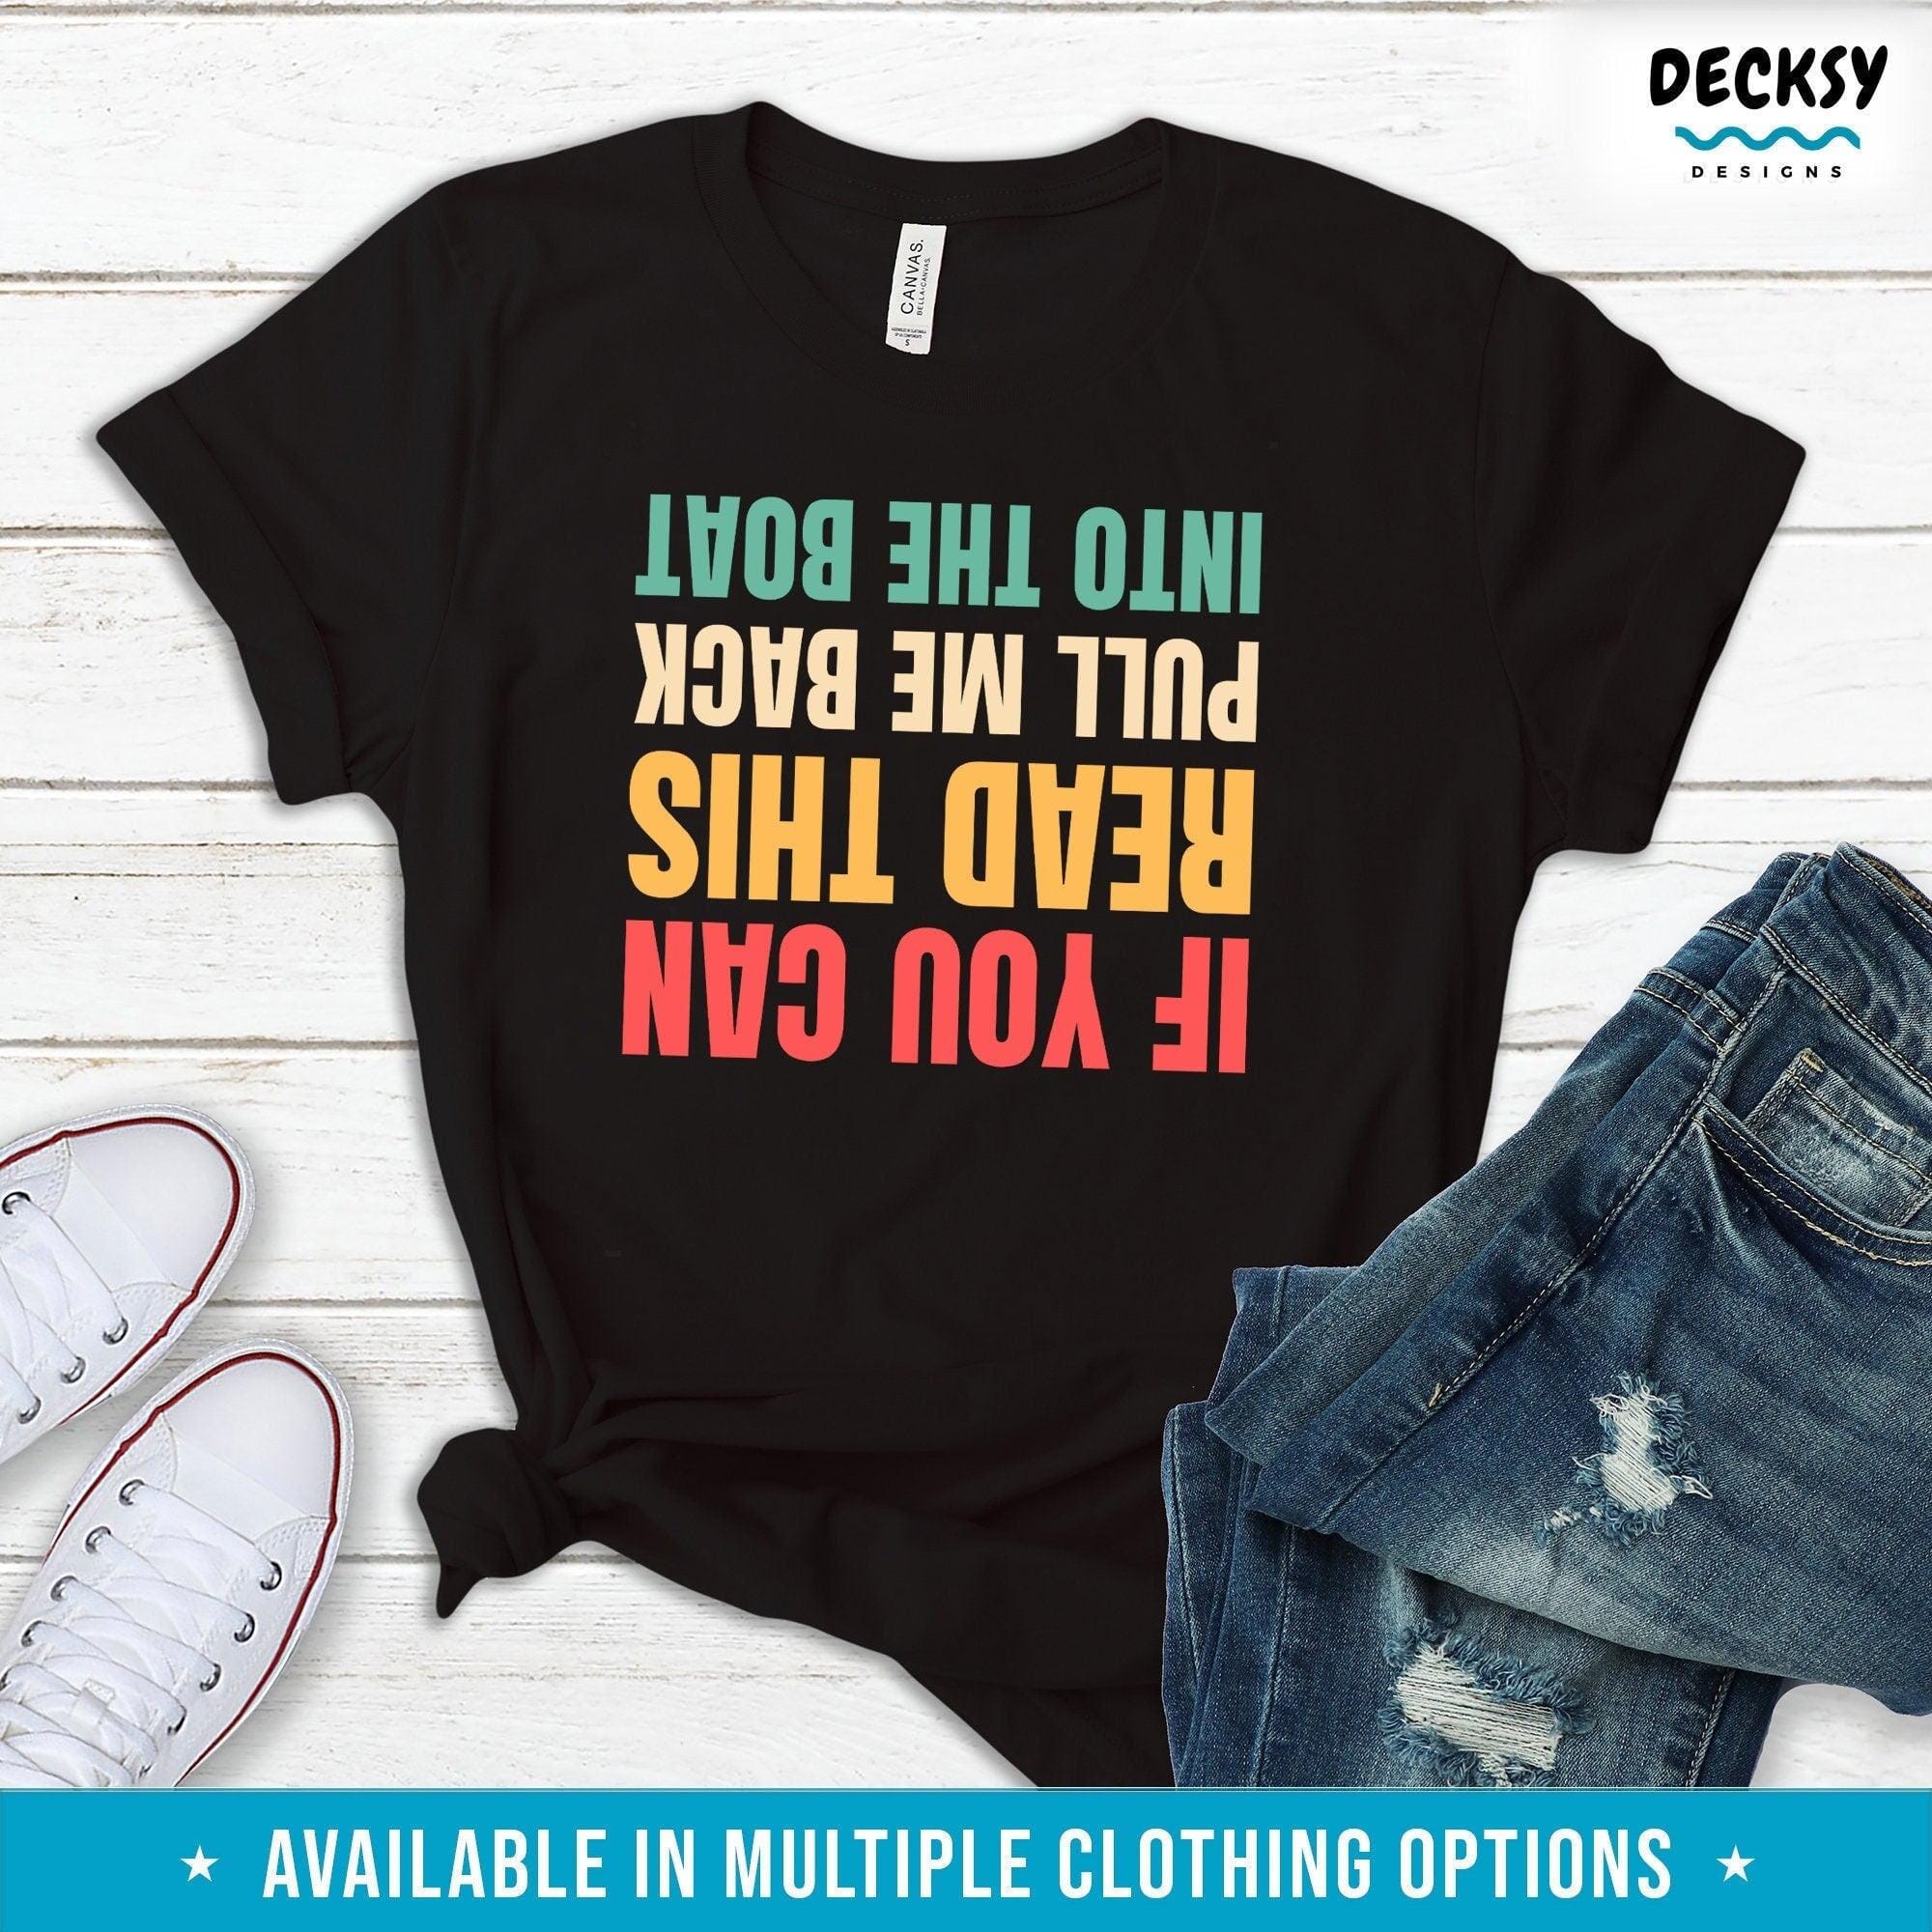 Funny Boating Tshirt, Sailing Gift-Clothing:Gender-Neutral Adult Clothing:Tops & Tees:T-shirts:Graphic Tees-DecksyDesigns